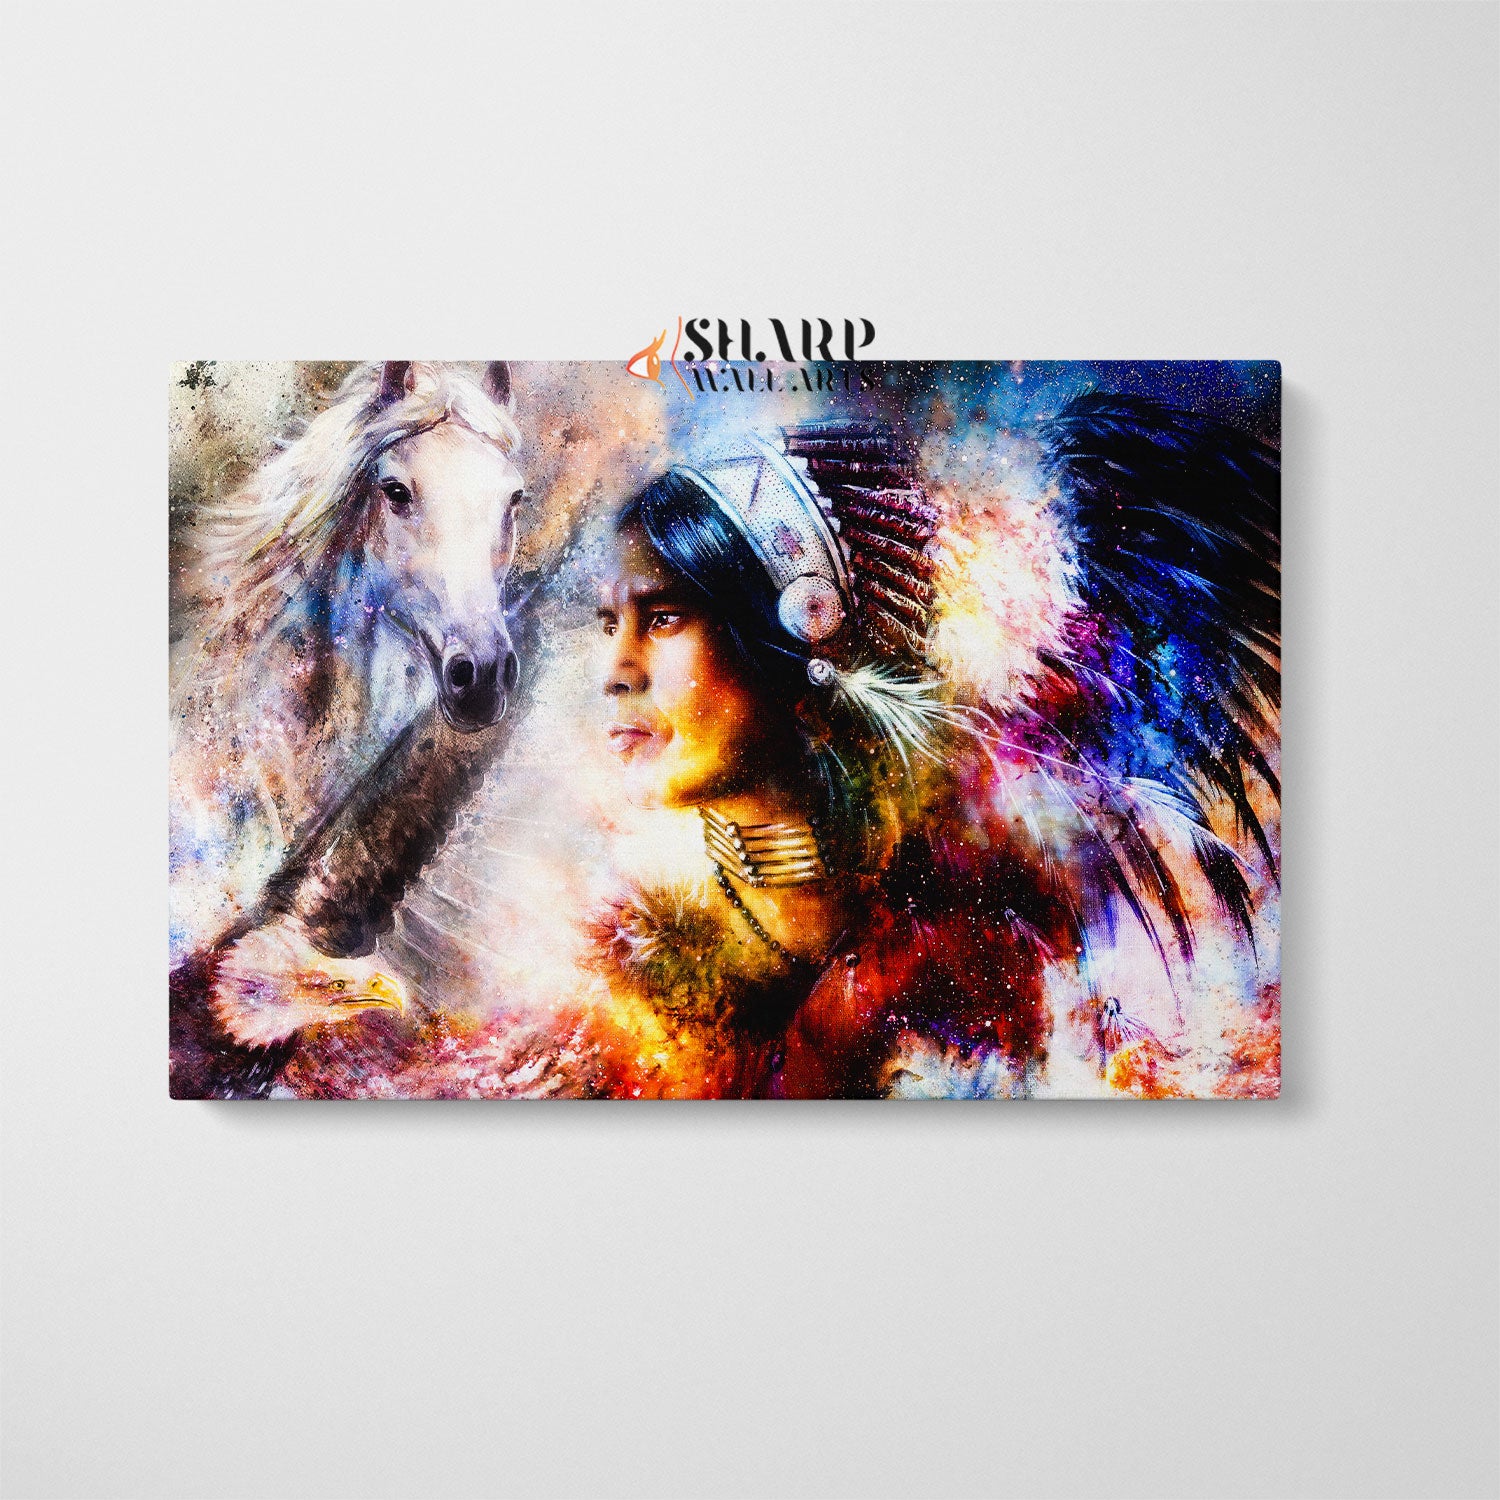 Native American Chief With Headdress Canvas Wall Art